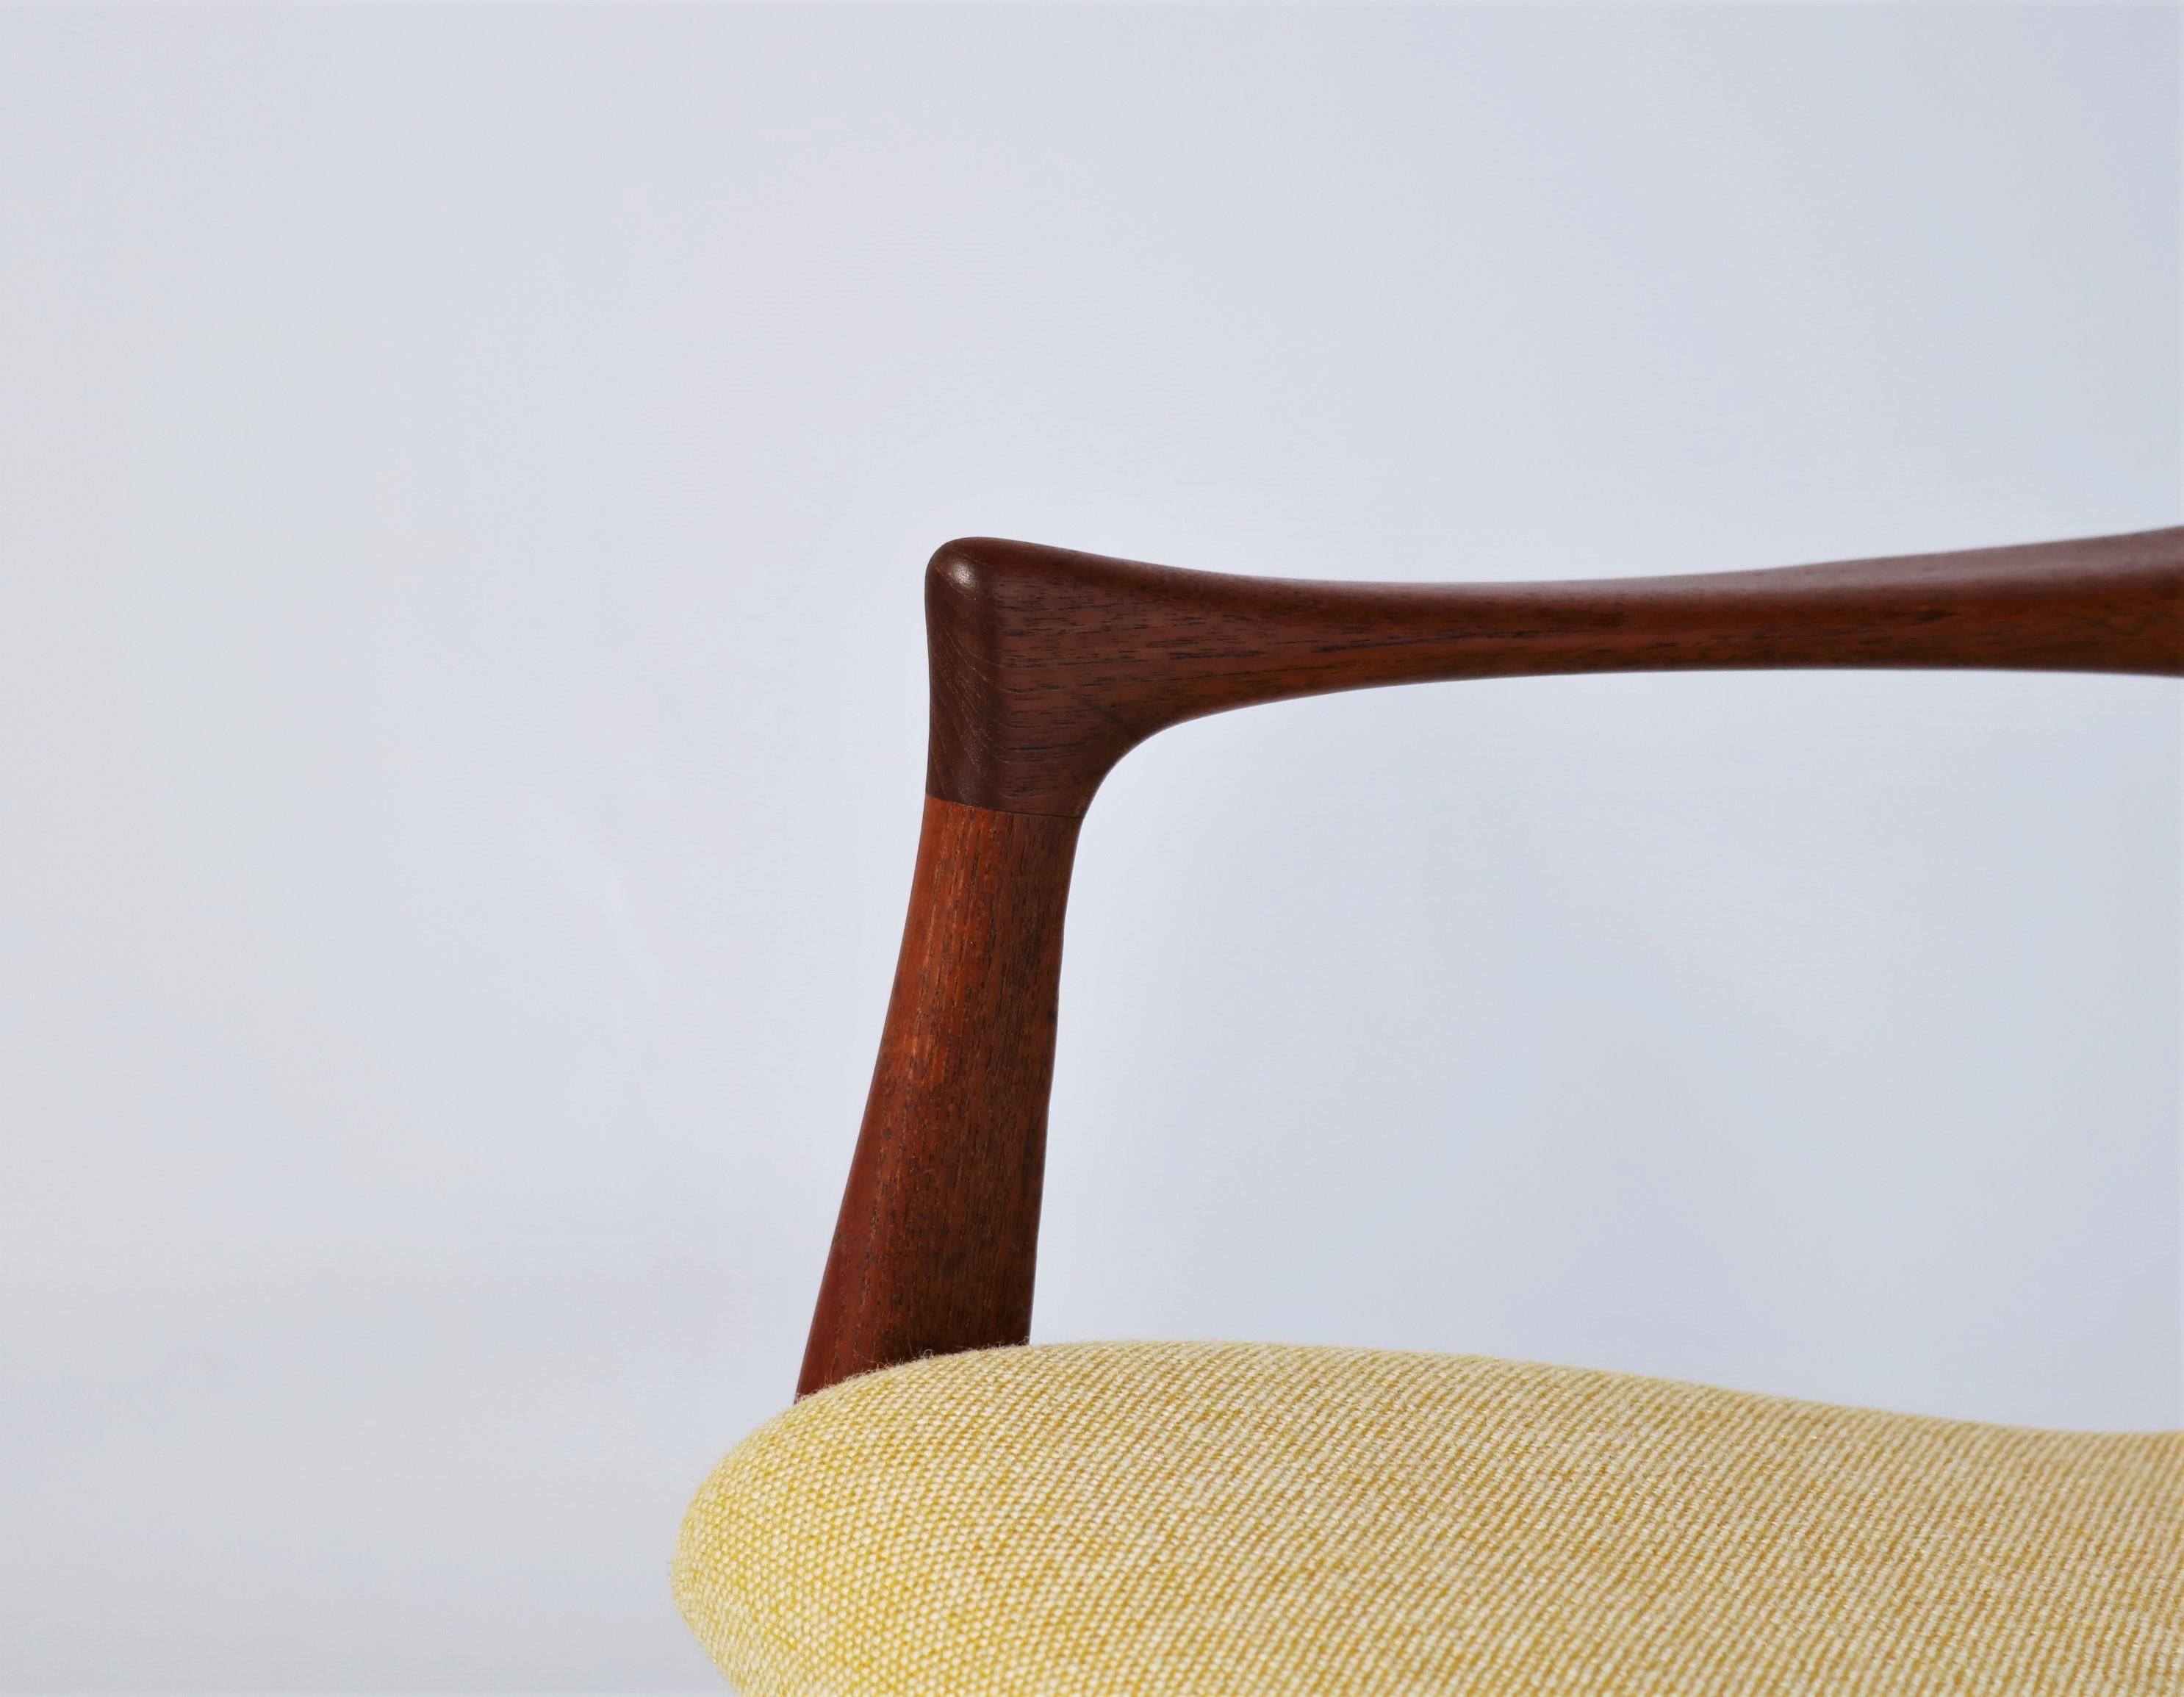 Vintage Danish modern easy chair in solid teak wood and yellow/white 